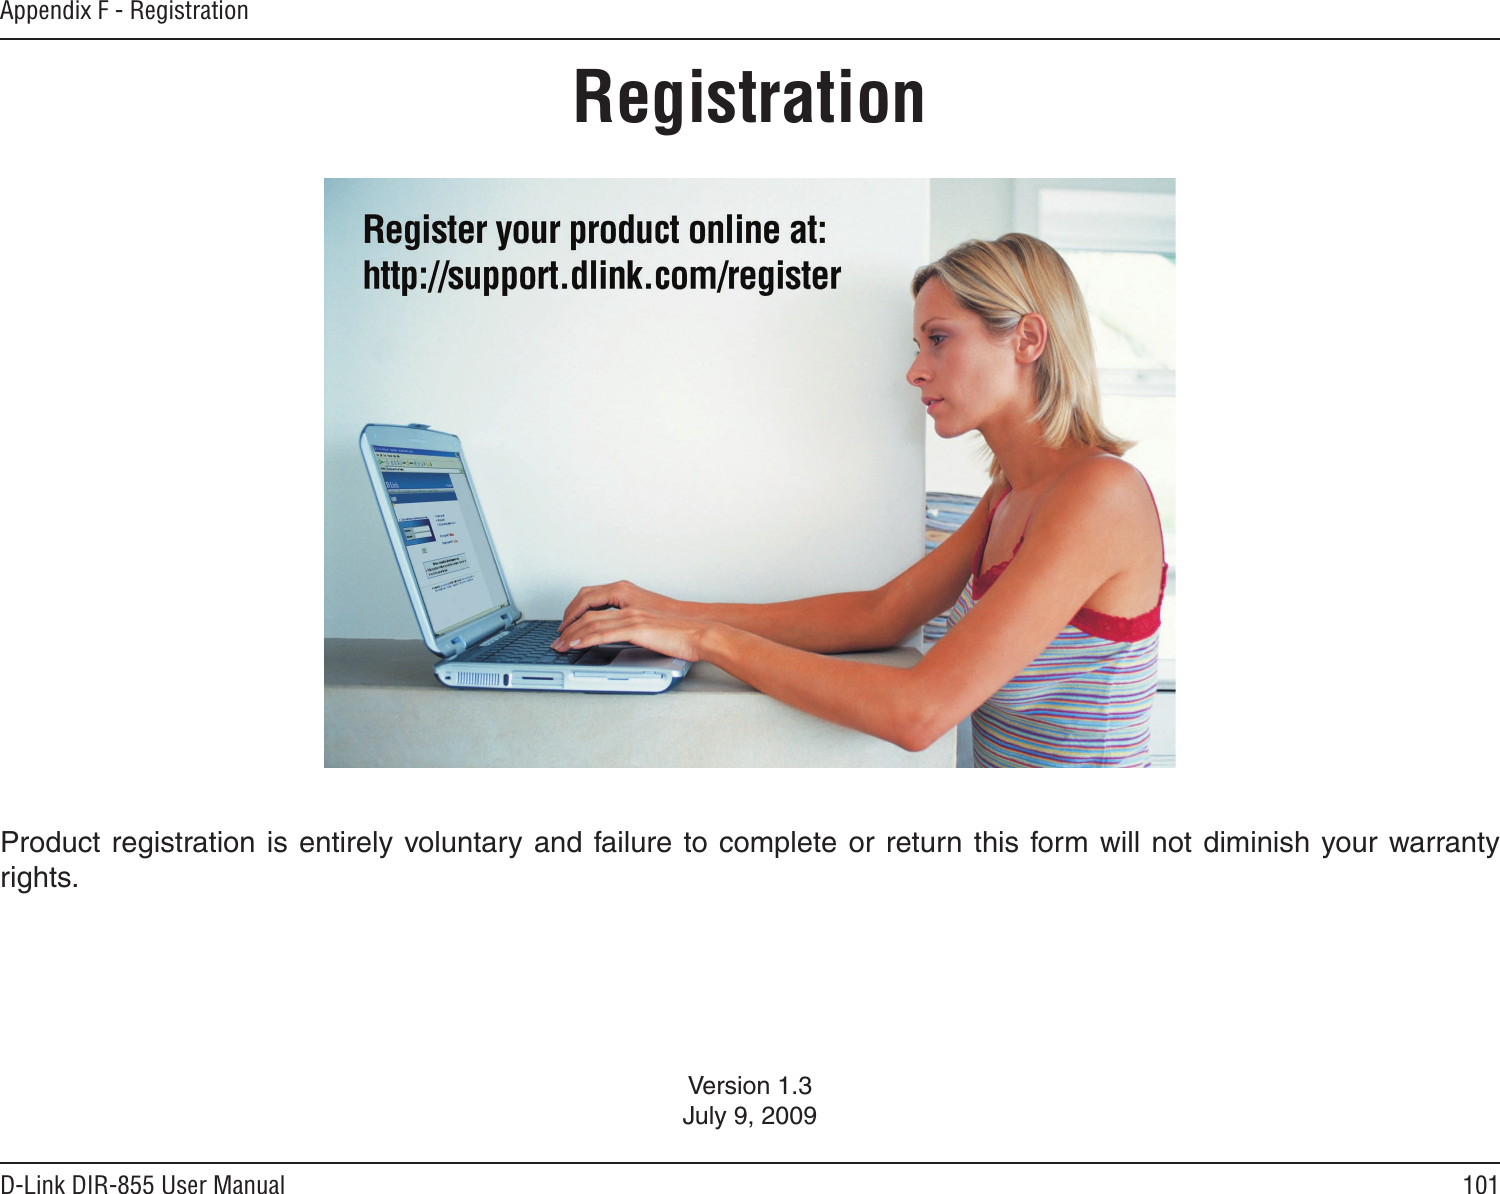 101D-Link DIR-855 User ManualAppendix F - RegistrationVersion 1.3July 9, 2009Product registration is entirely voluntary and failure to complete or return this form will not diminish your warranty rights.Registration